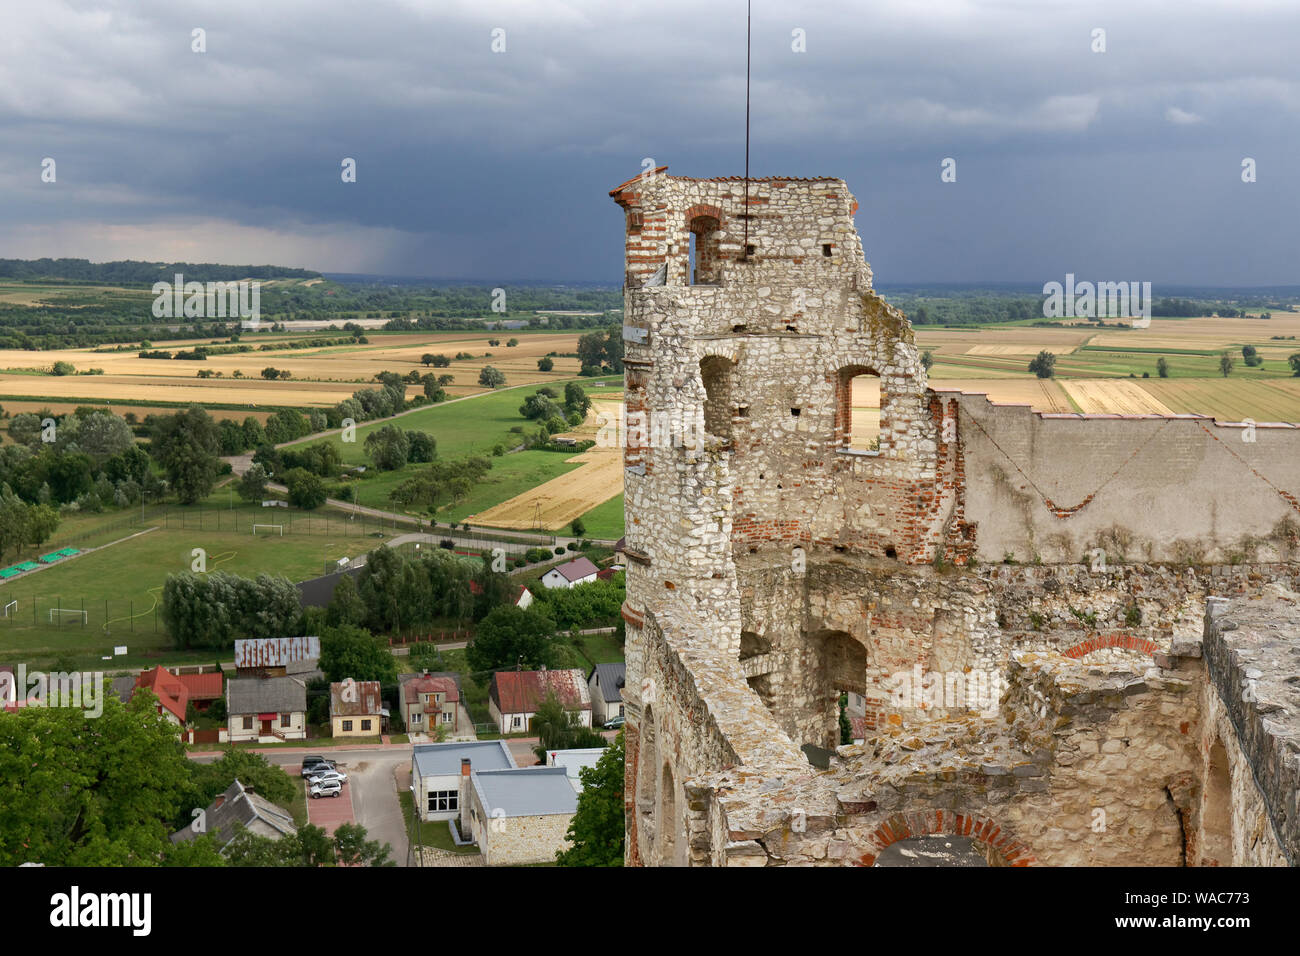 JANOWIEC - POLAND July 11 2019: Ruins of 16th century Kazimierz Dolny Castle defensive fortification Poland Stock Photo